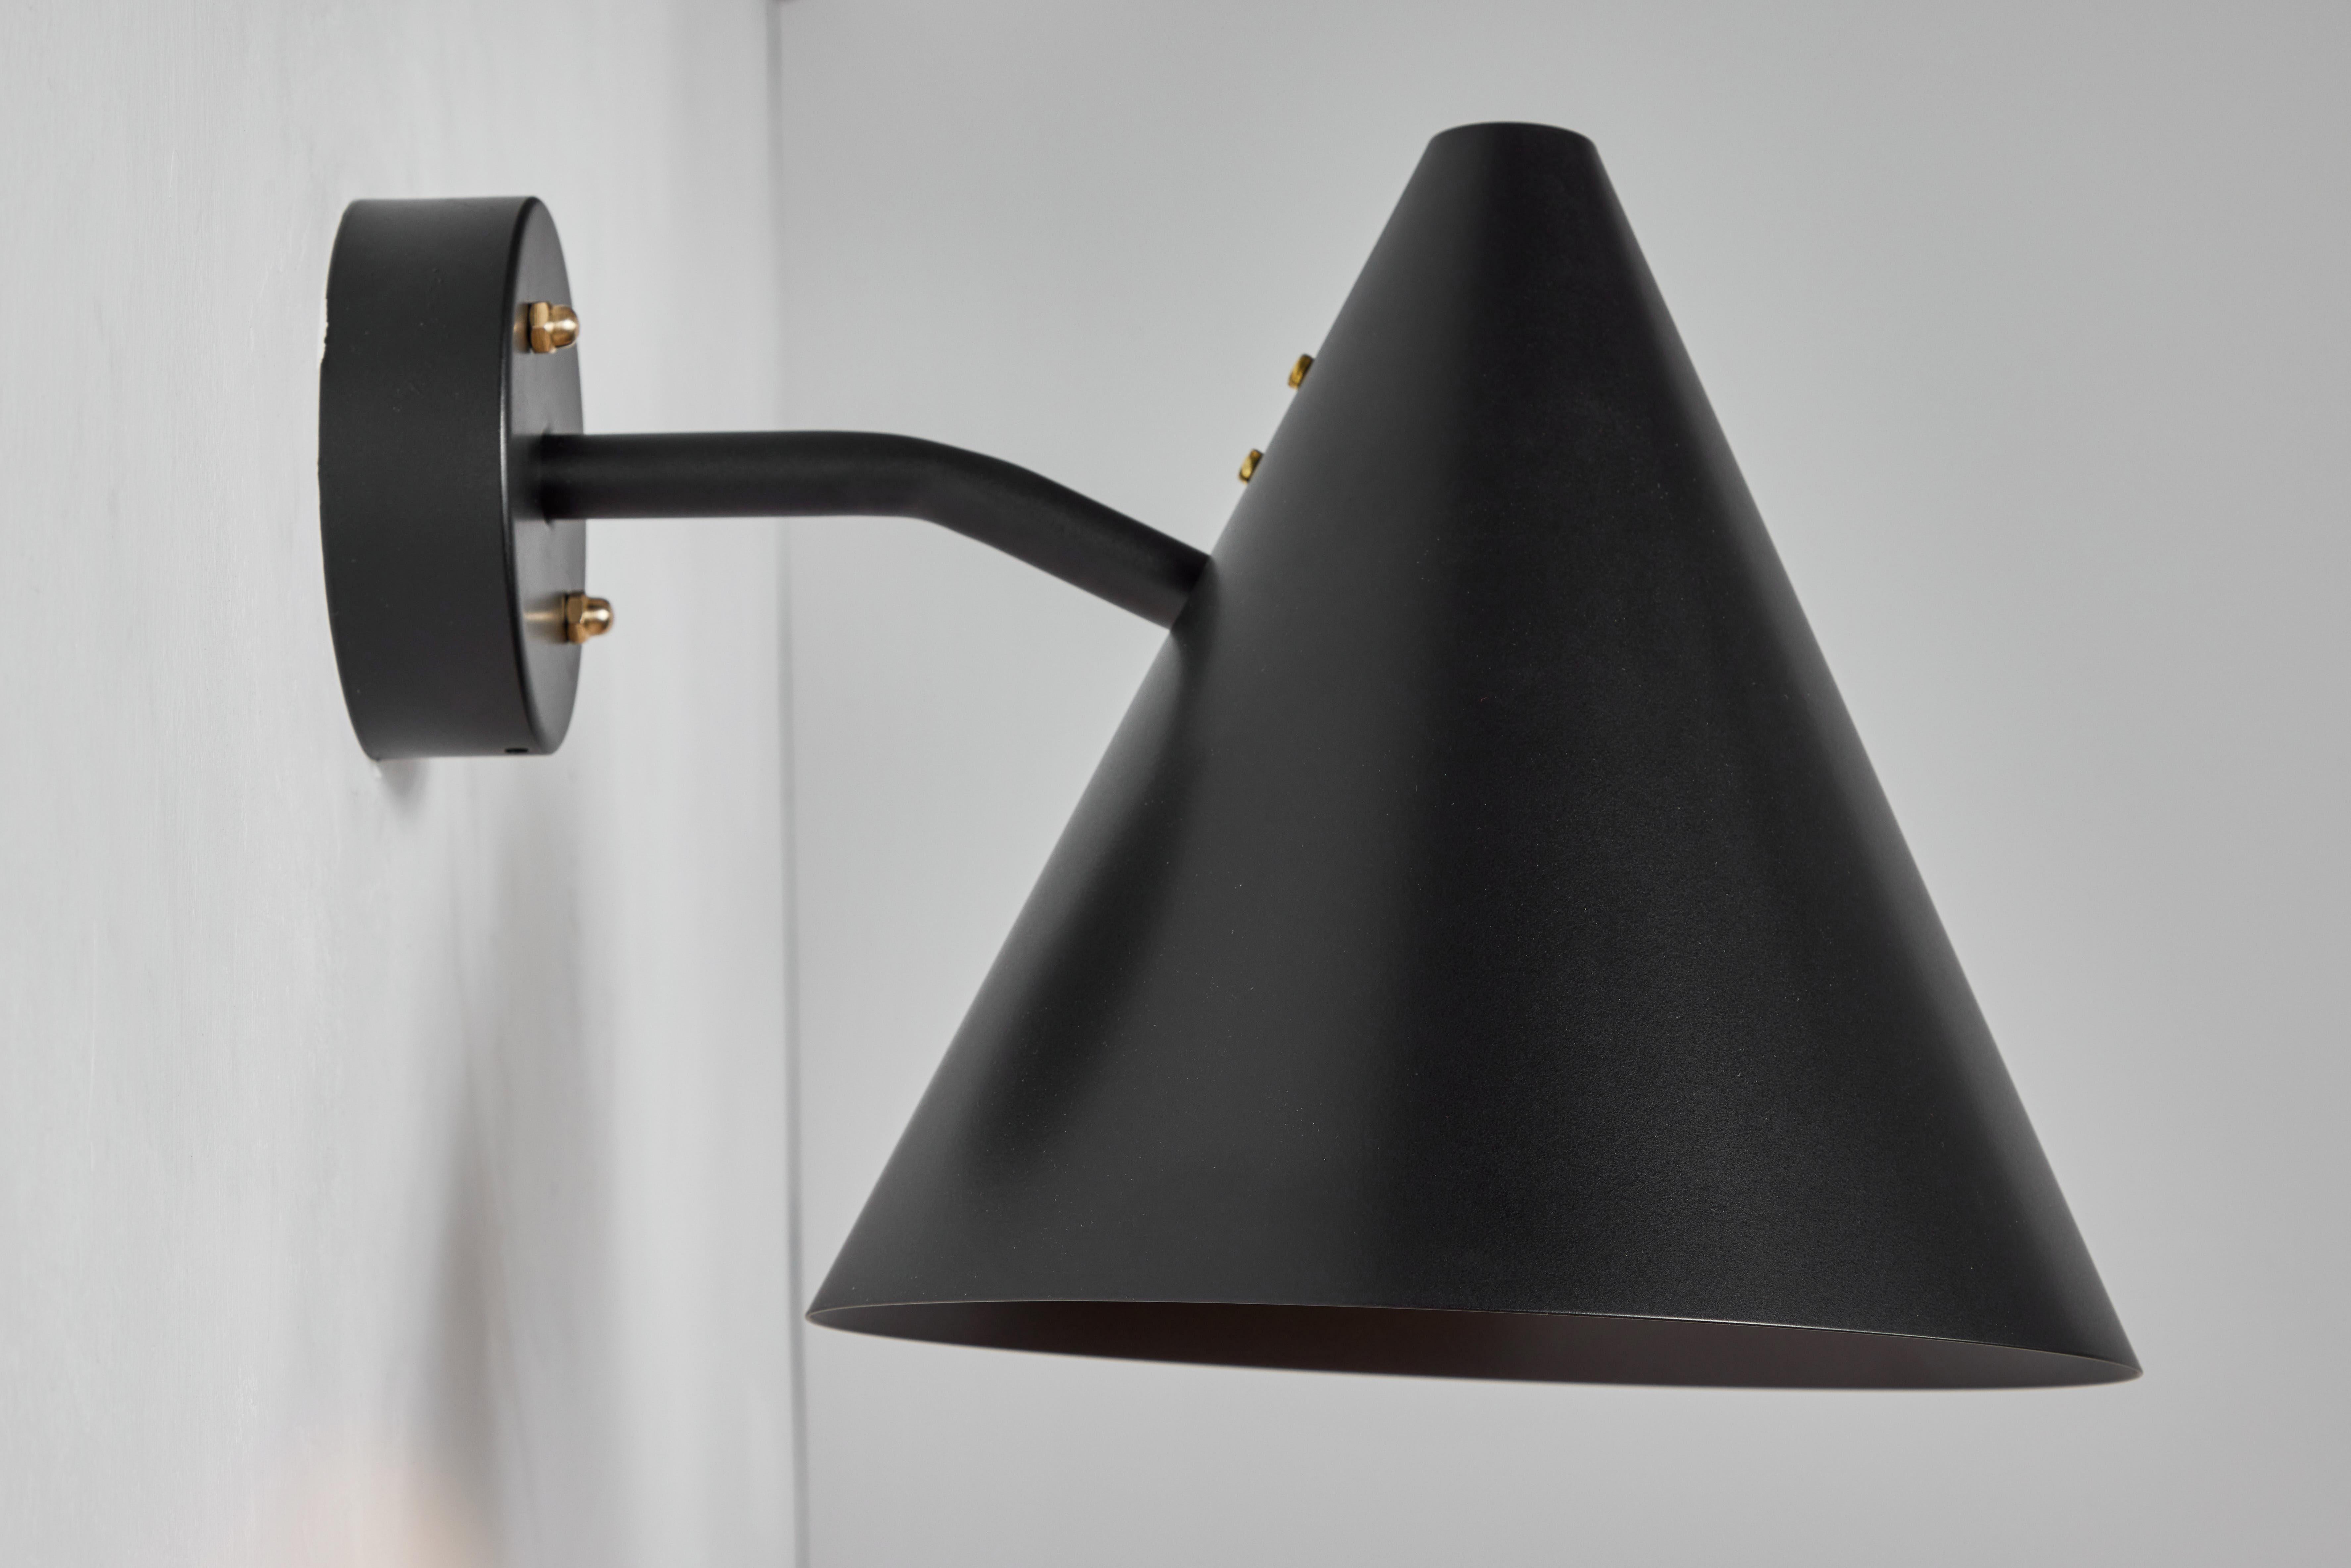 Hans-Agne Jakobsson 'Tratten' outdoor sconce in black.  An exclusive made for U.S. and UL listed authorized re-edition of the classic Swedish design executed in black painted metal shade with black painted interior and brass hardware. Suitable for